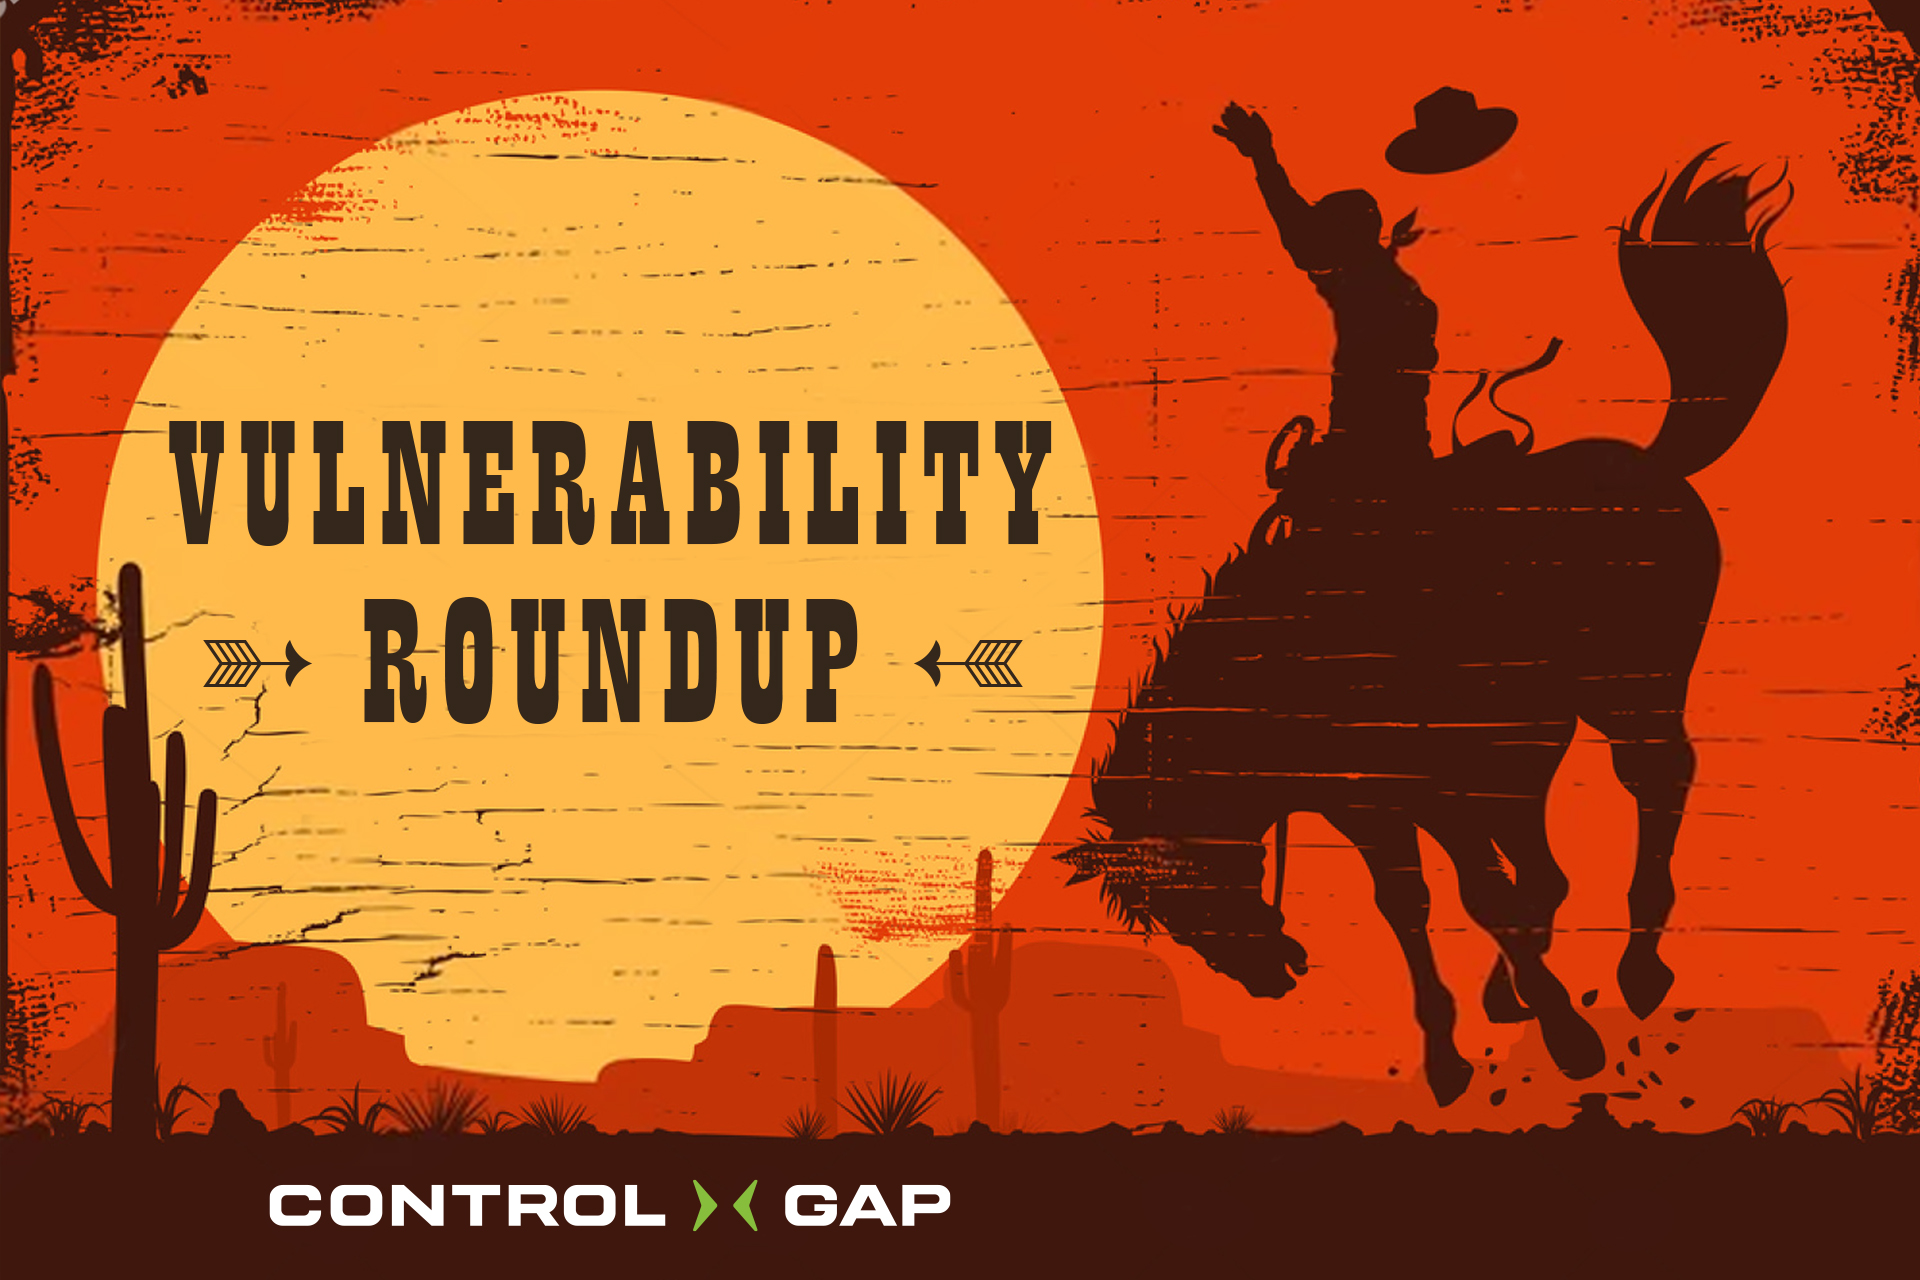 Control Gap Vulnerability Roundup: January 14th to January 20th